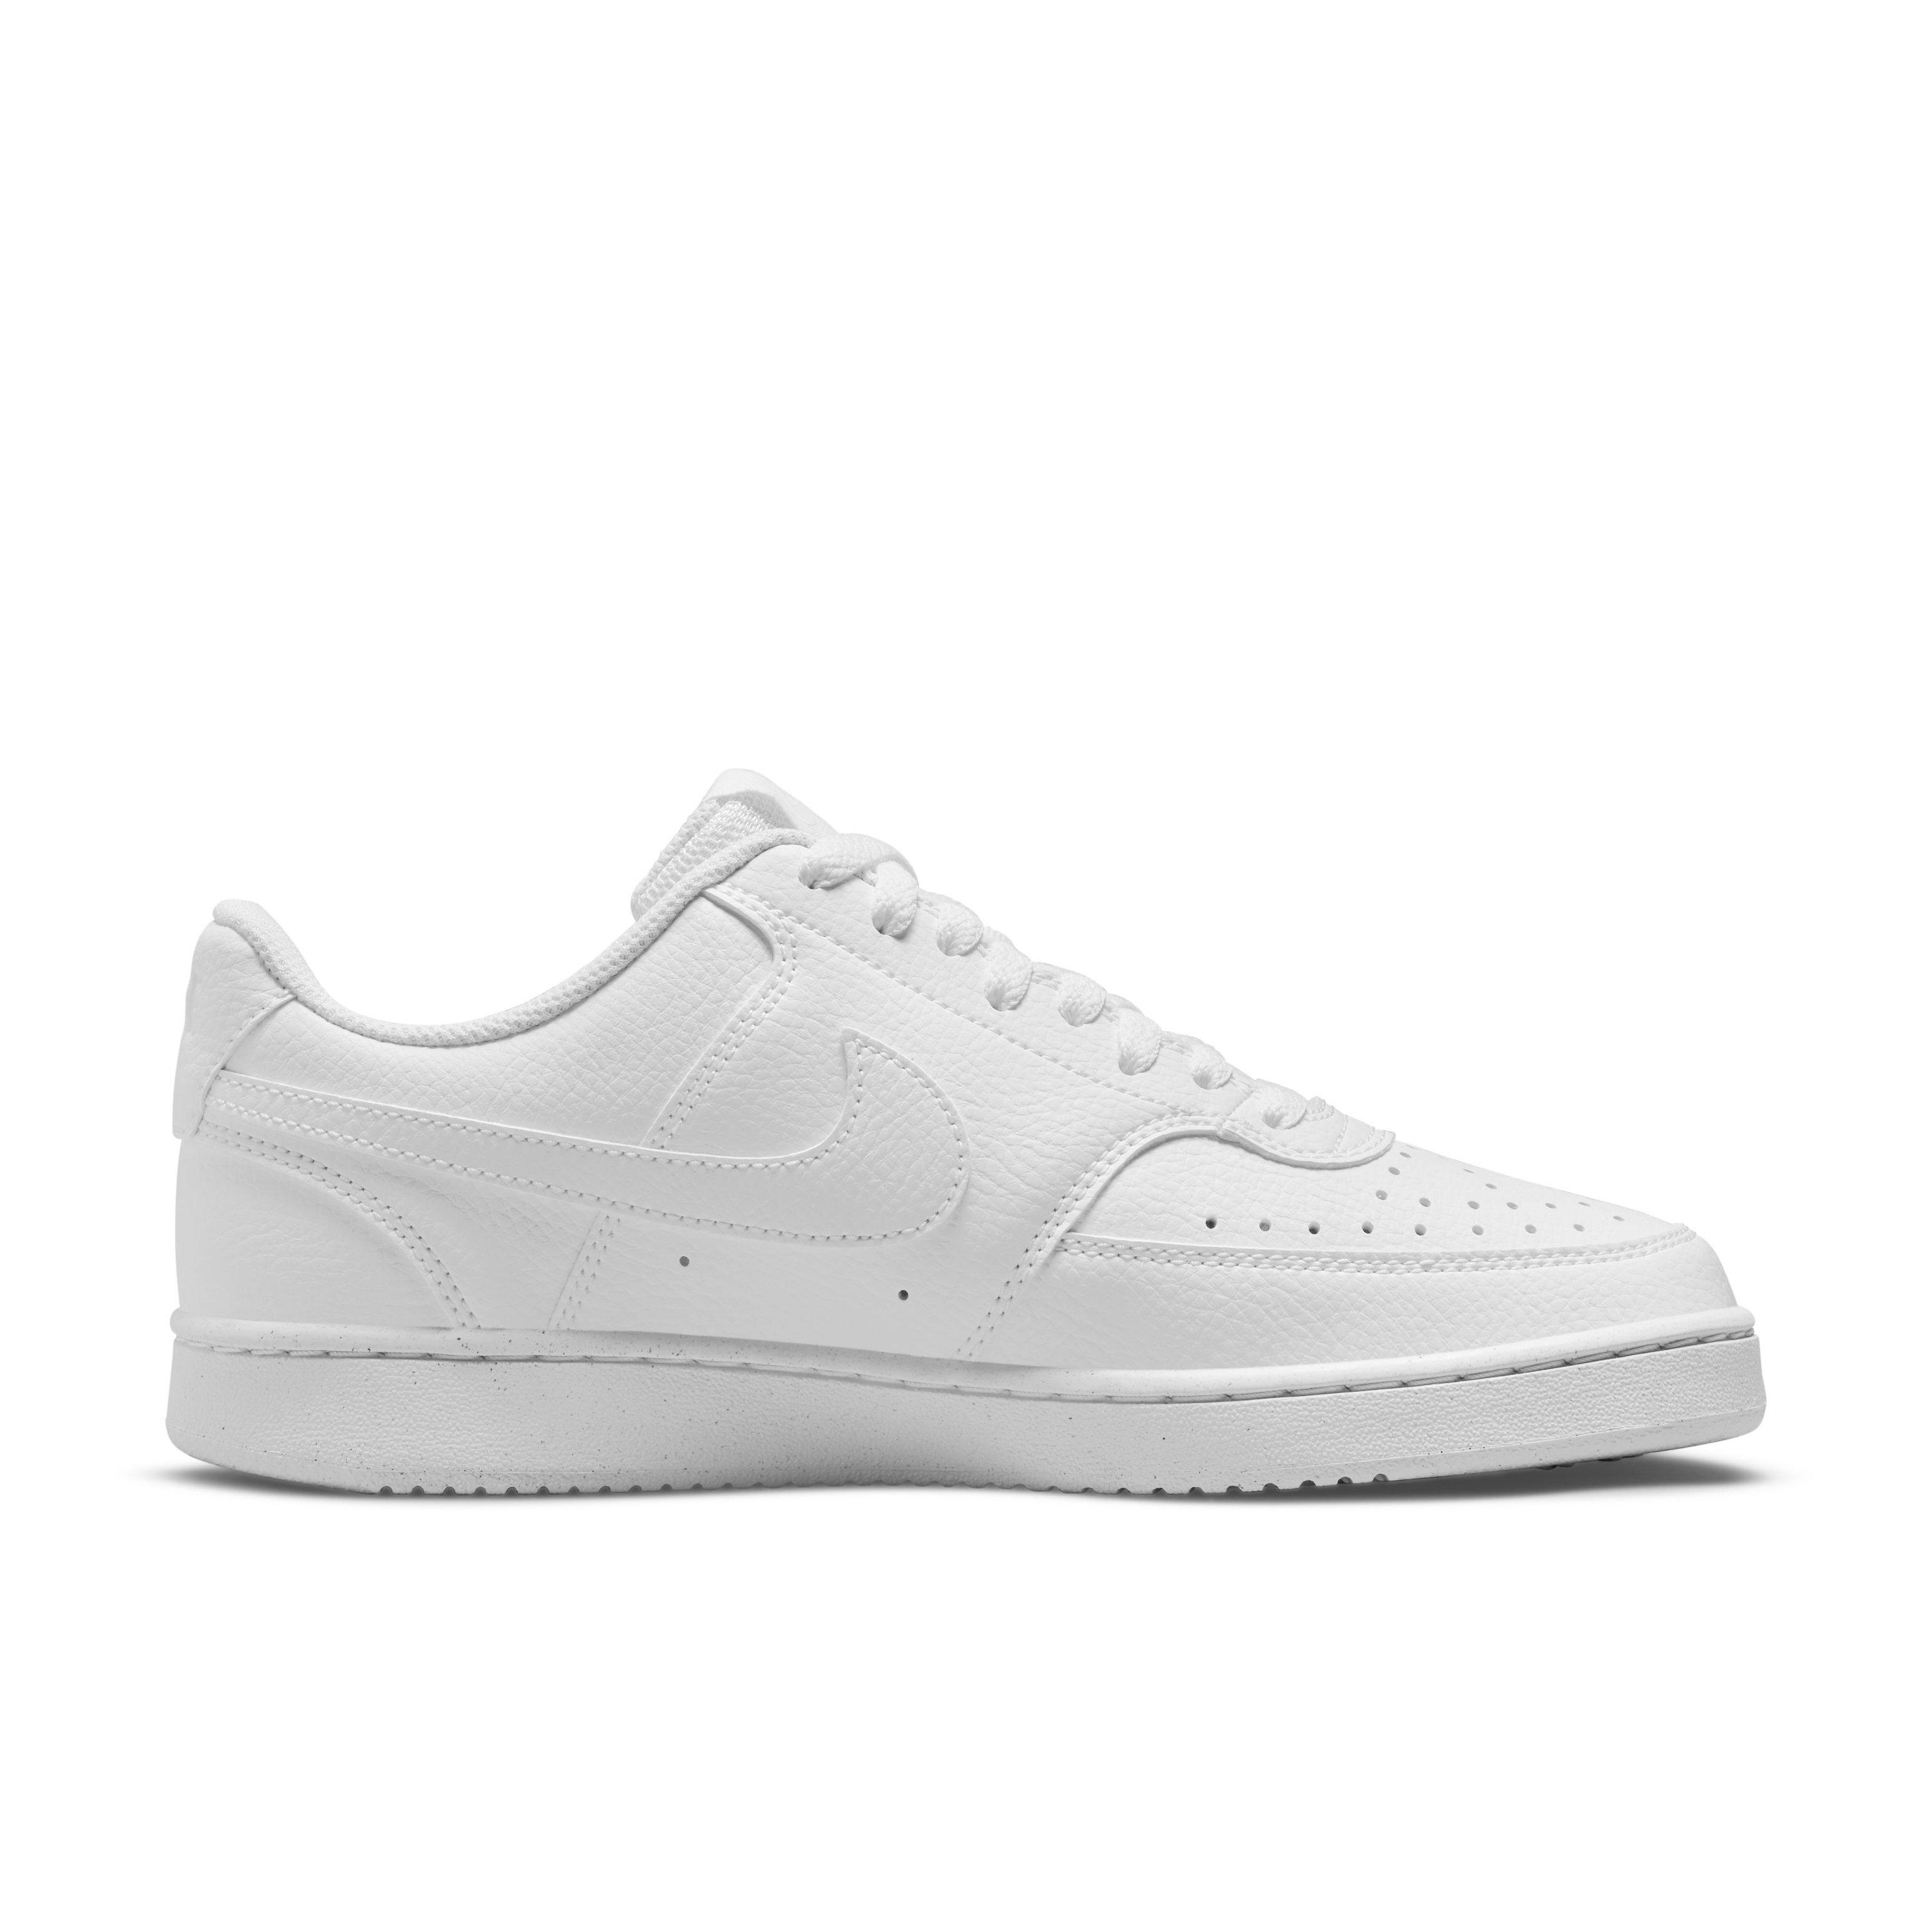 Court vision low next nature. Nike Court Vision Low White. Nike Court Vision 1 Low. Найк Court Vision Low. Nike Court Vision женские.